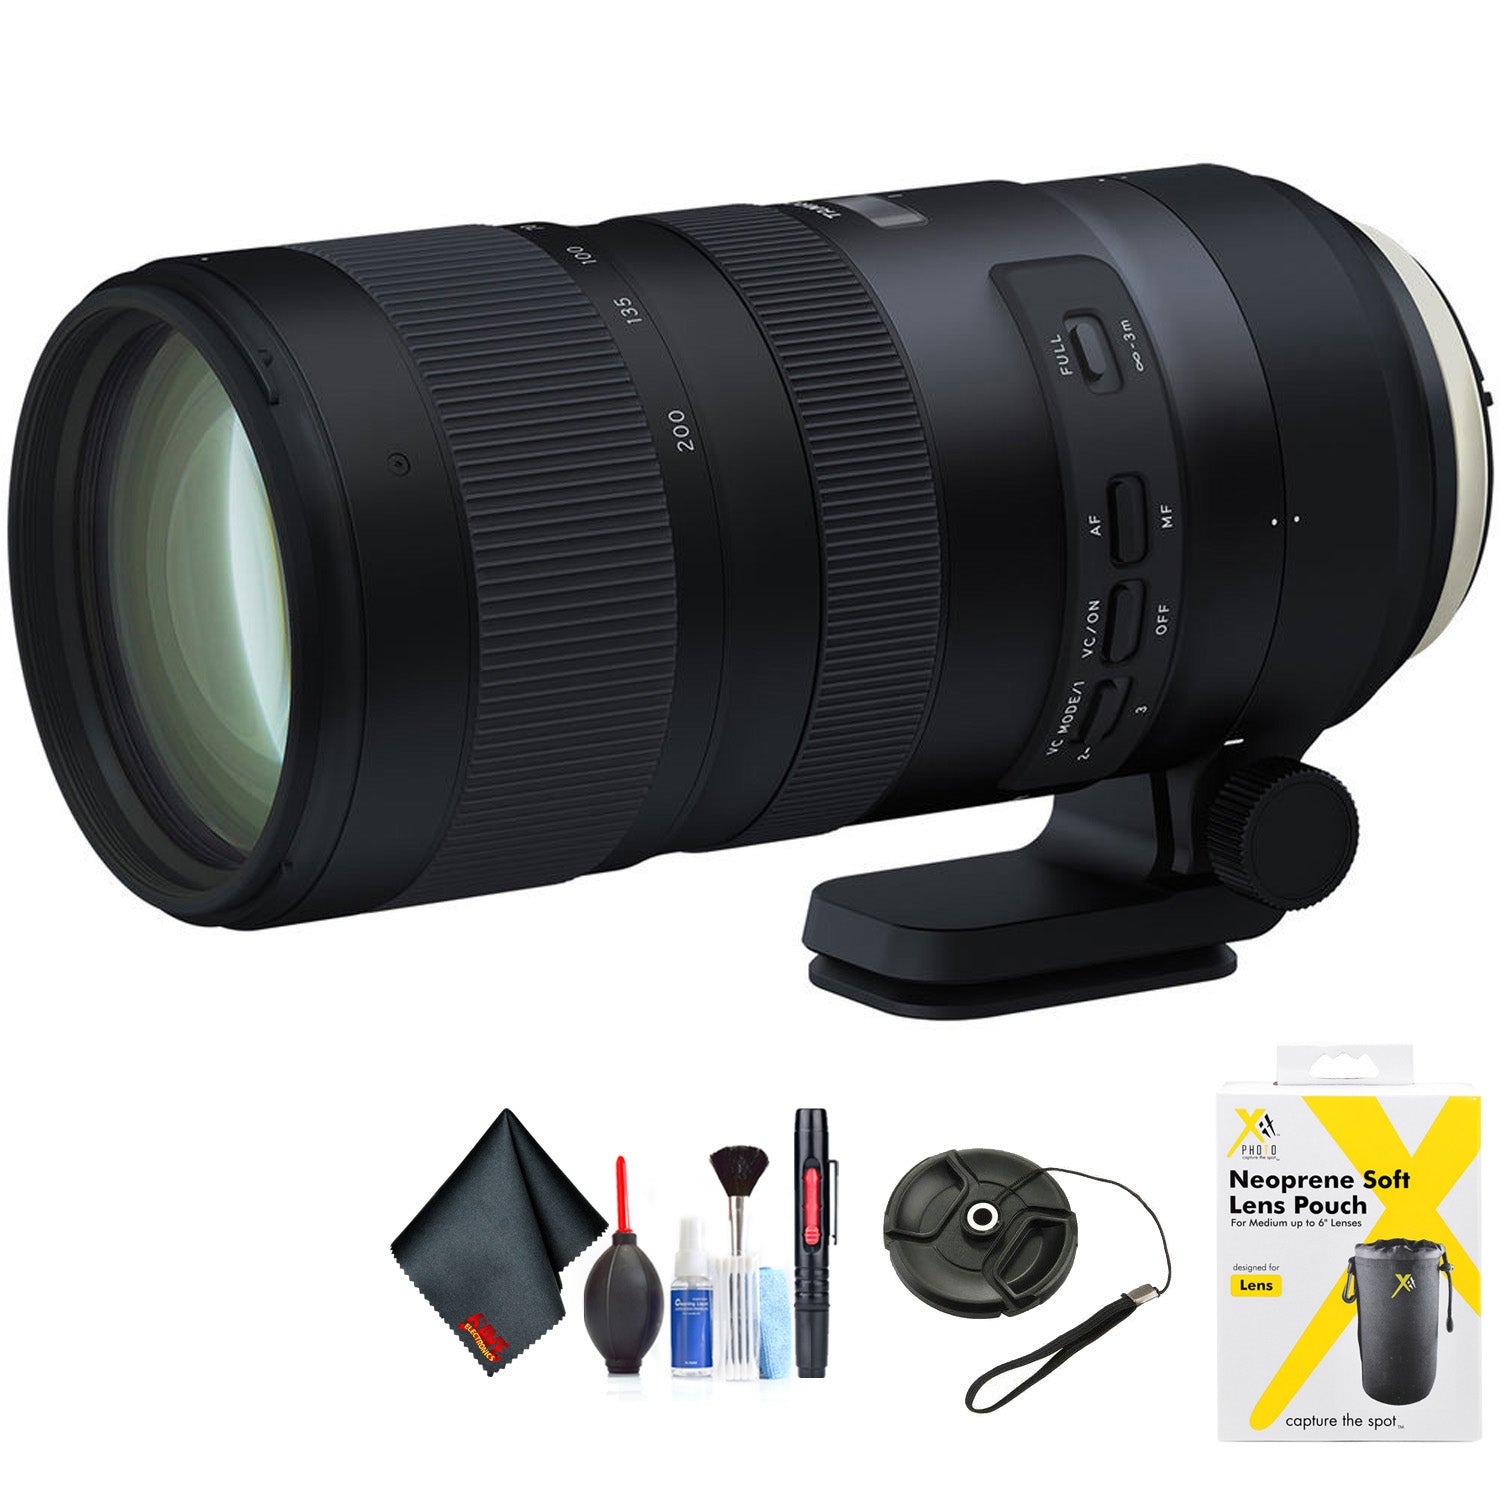 Tamron SP 70-200mm f/2.8 Di VC USD G2 Lens for Nikon F for Nikon F Mount + Accessories (International Model with 2 Year